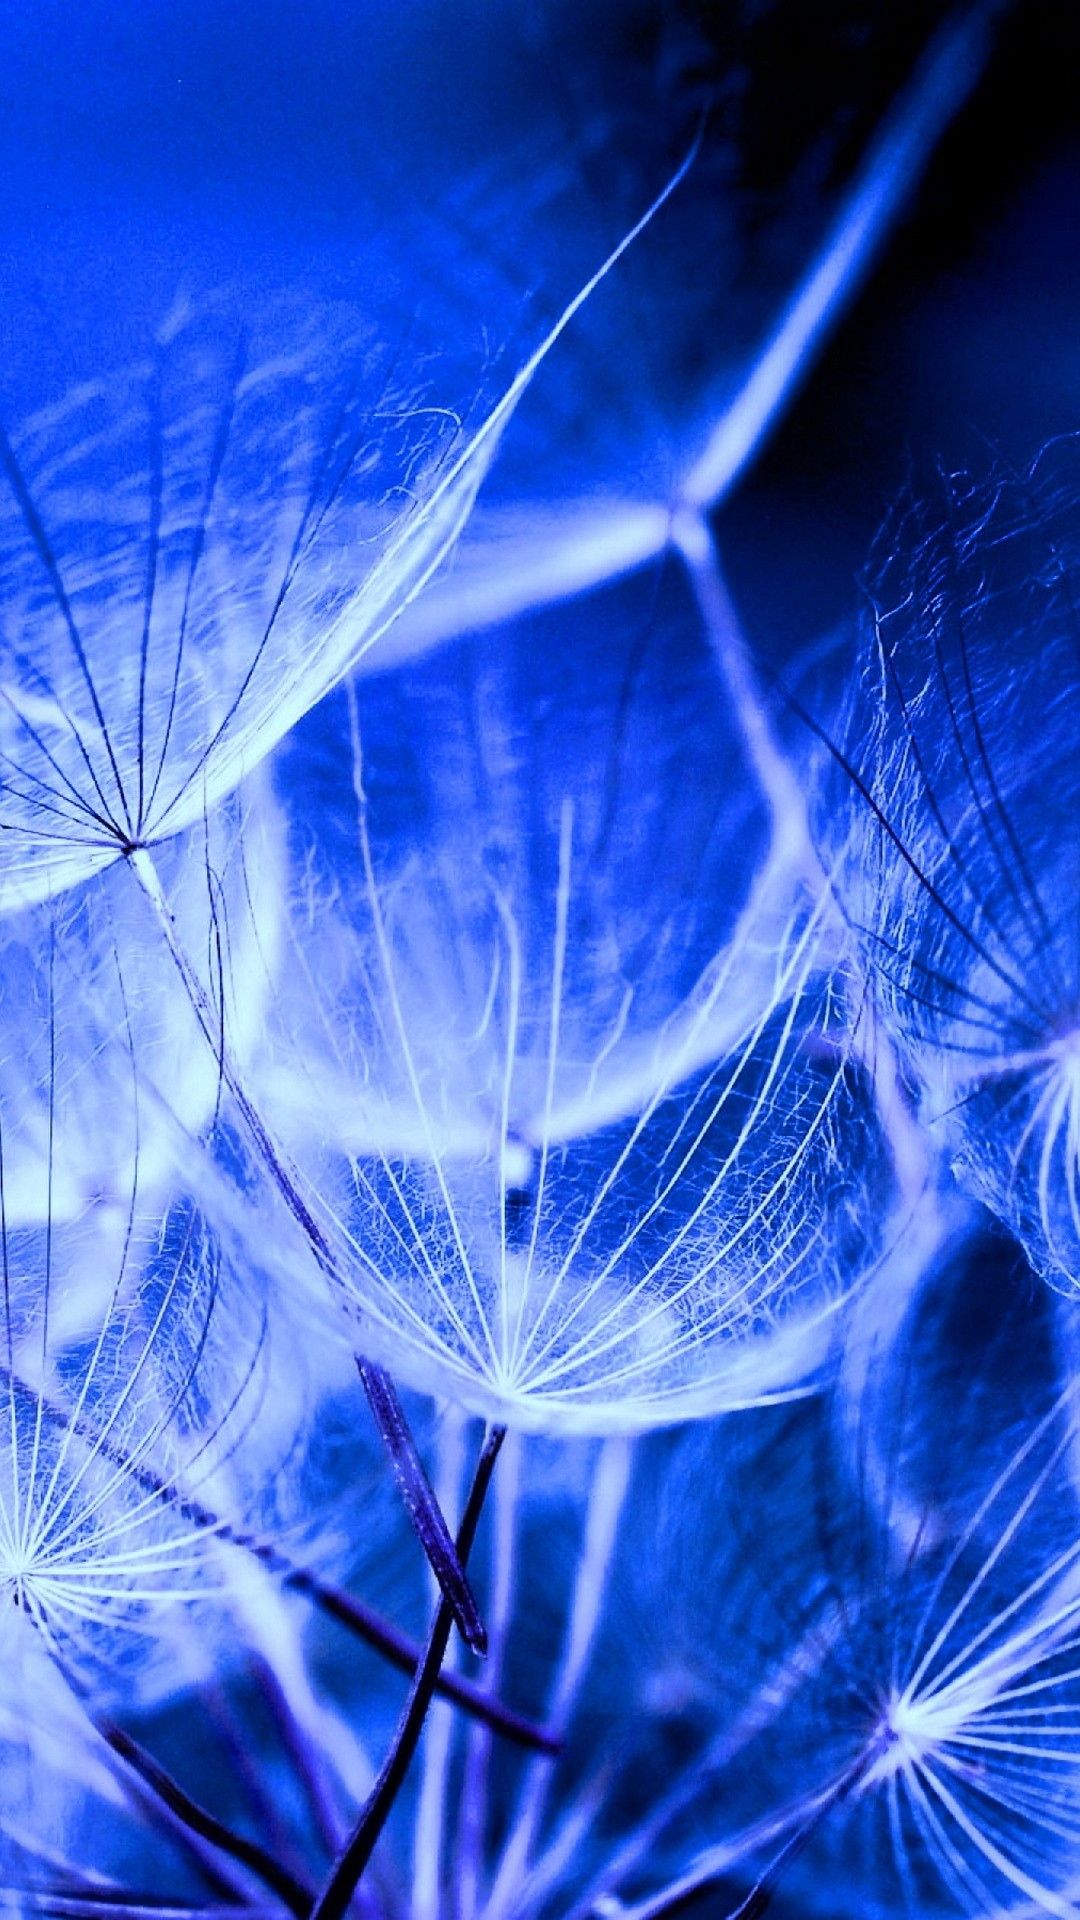 A blue and white photo of dandelion seeds. - Macro